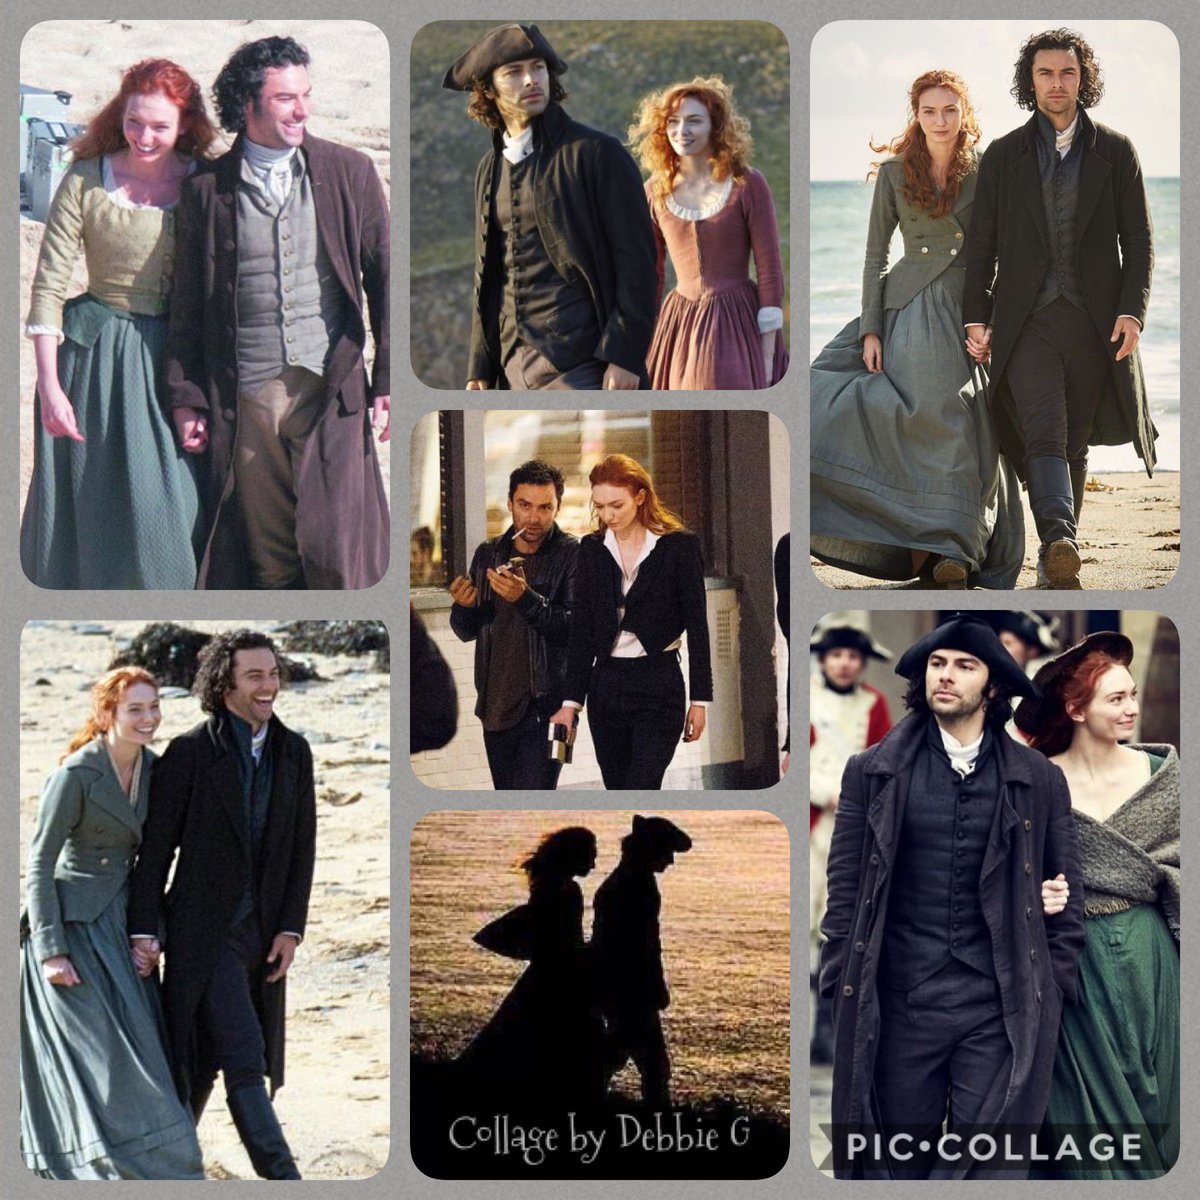 A beautiful stroll down memory lane #AidanCrew for my #ThoughtsforThursday with #AidanTurner and #EleanorTomlinson. #Poldark.                I wish you a happy Thursday. Please stay safe. XoXo 💁‍♀️💋😘